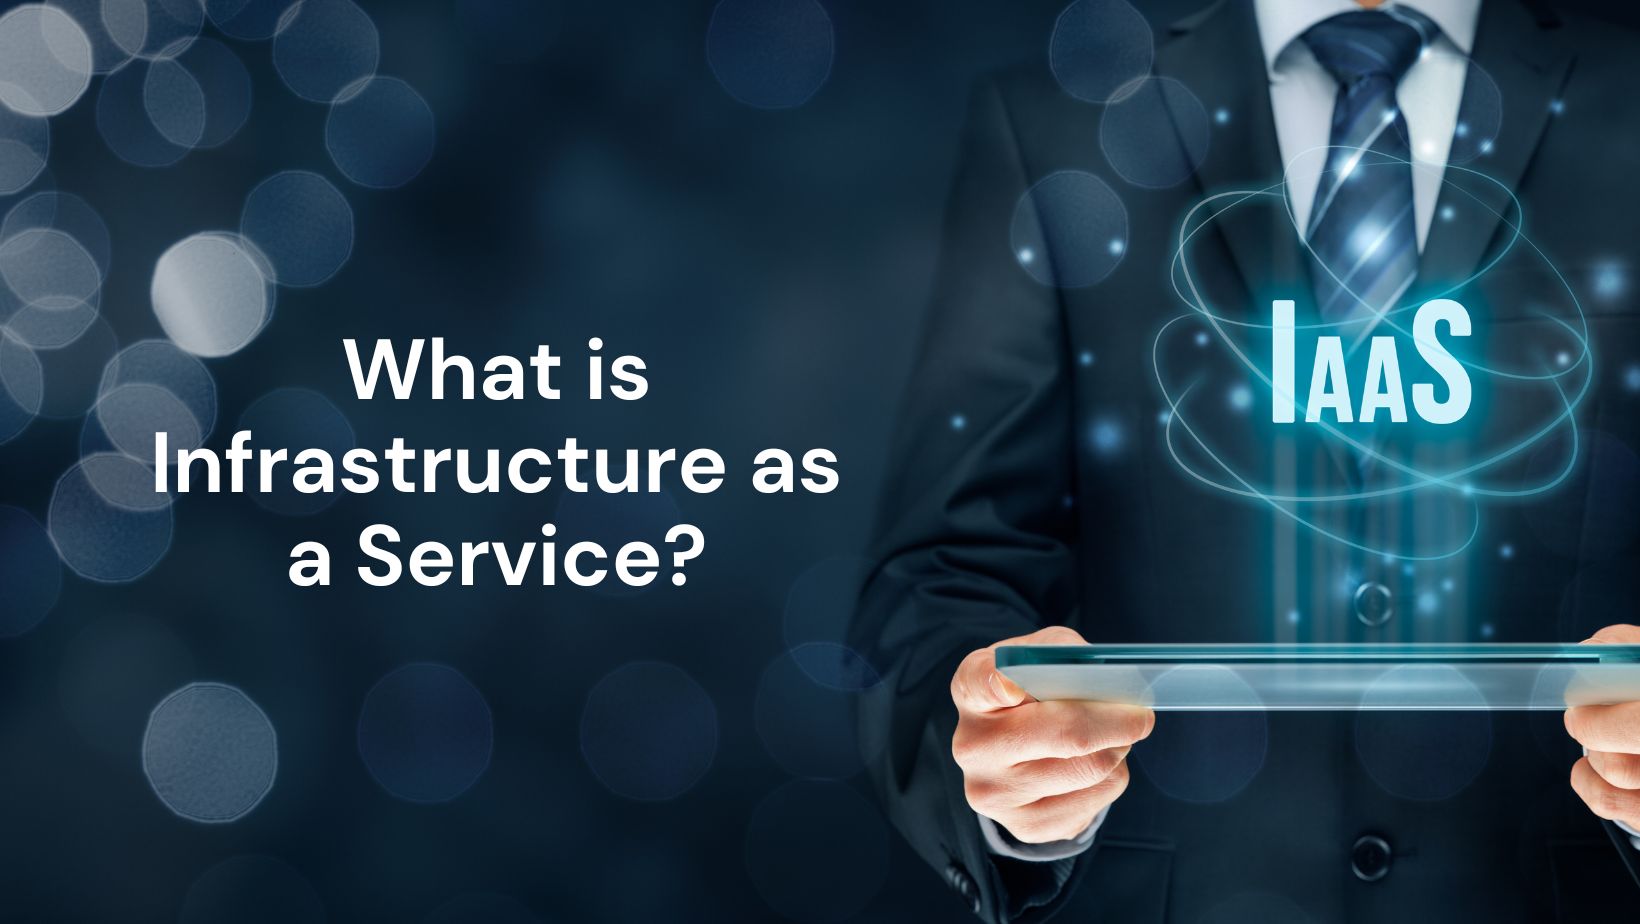 What is Infrastructure as a Service?